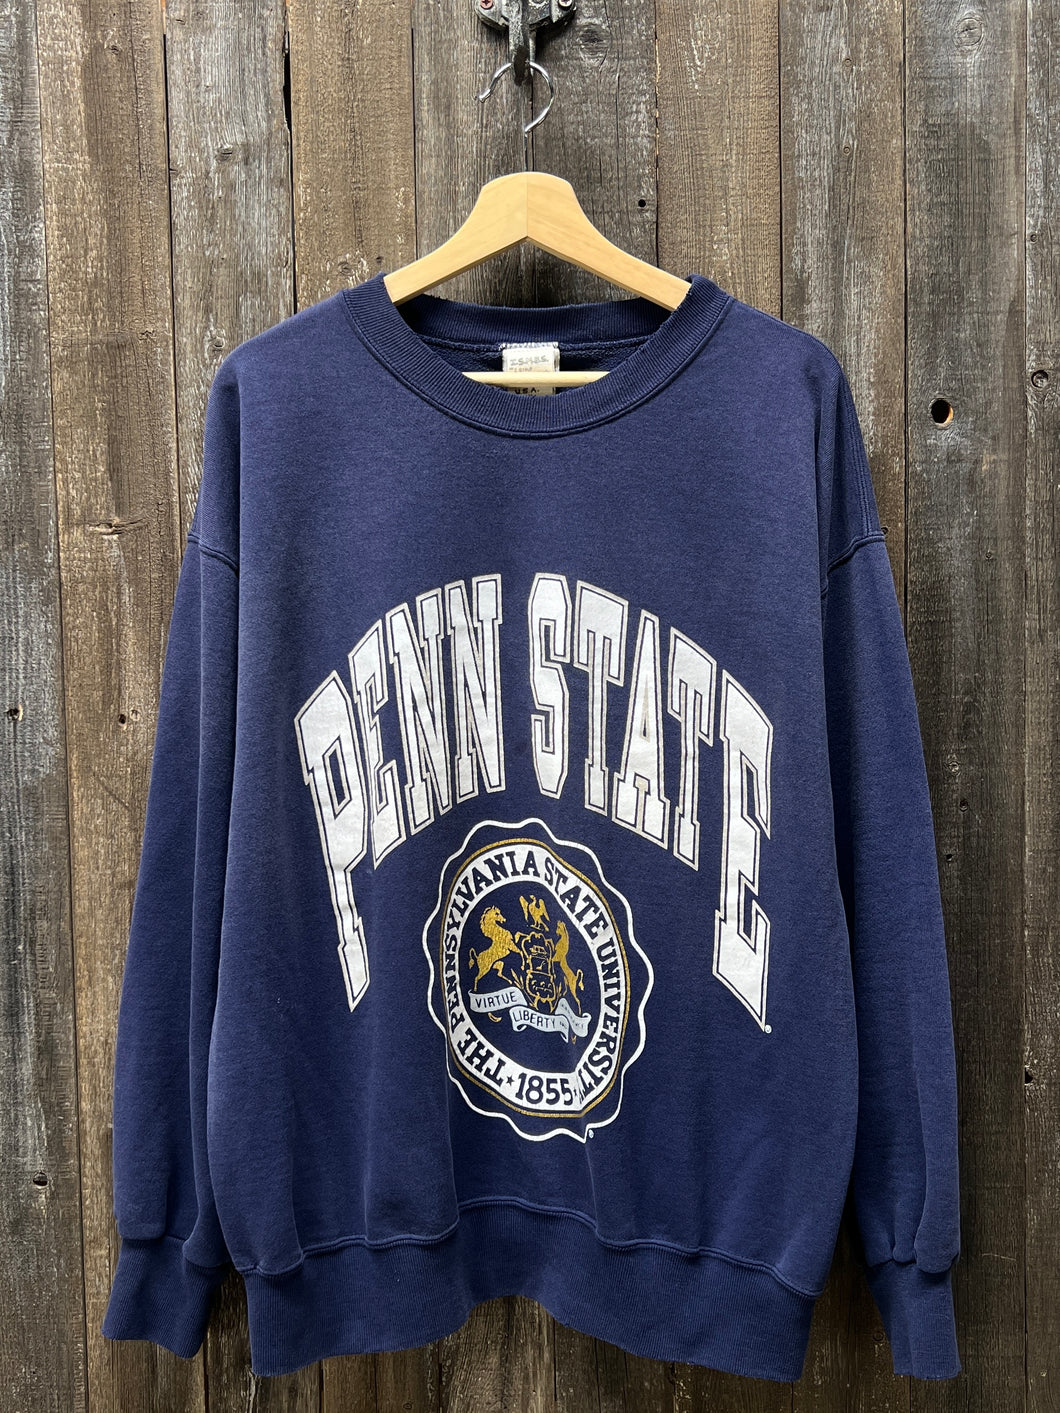 Penn State Sweatshirt -XL-Customize Your Embroidery Wording